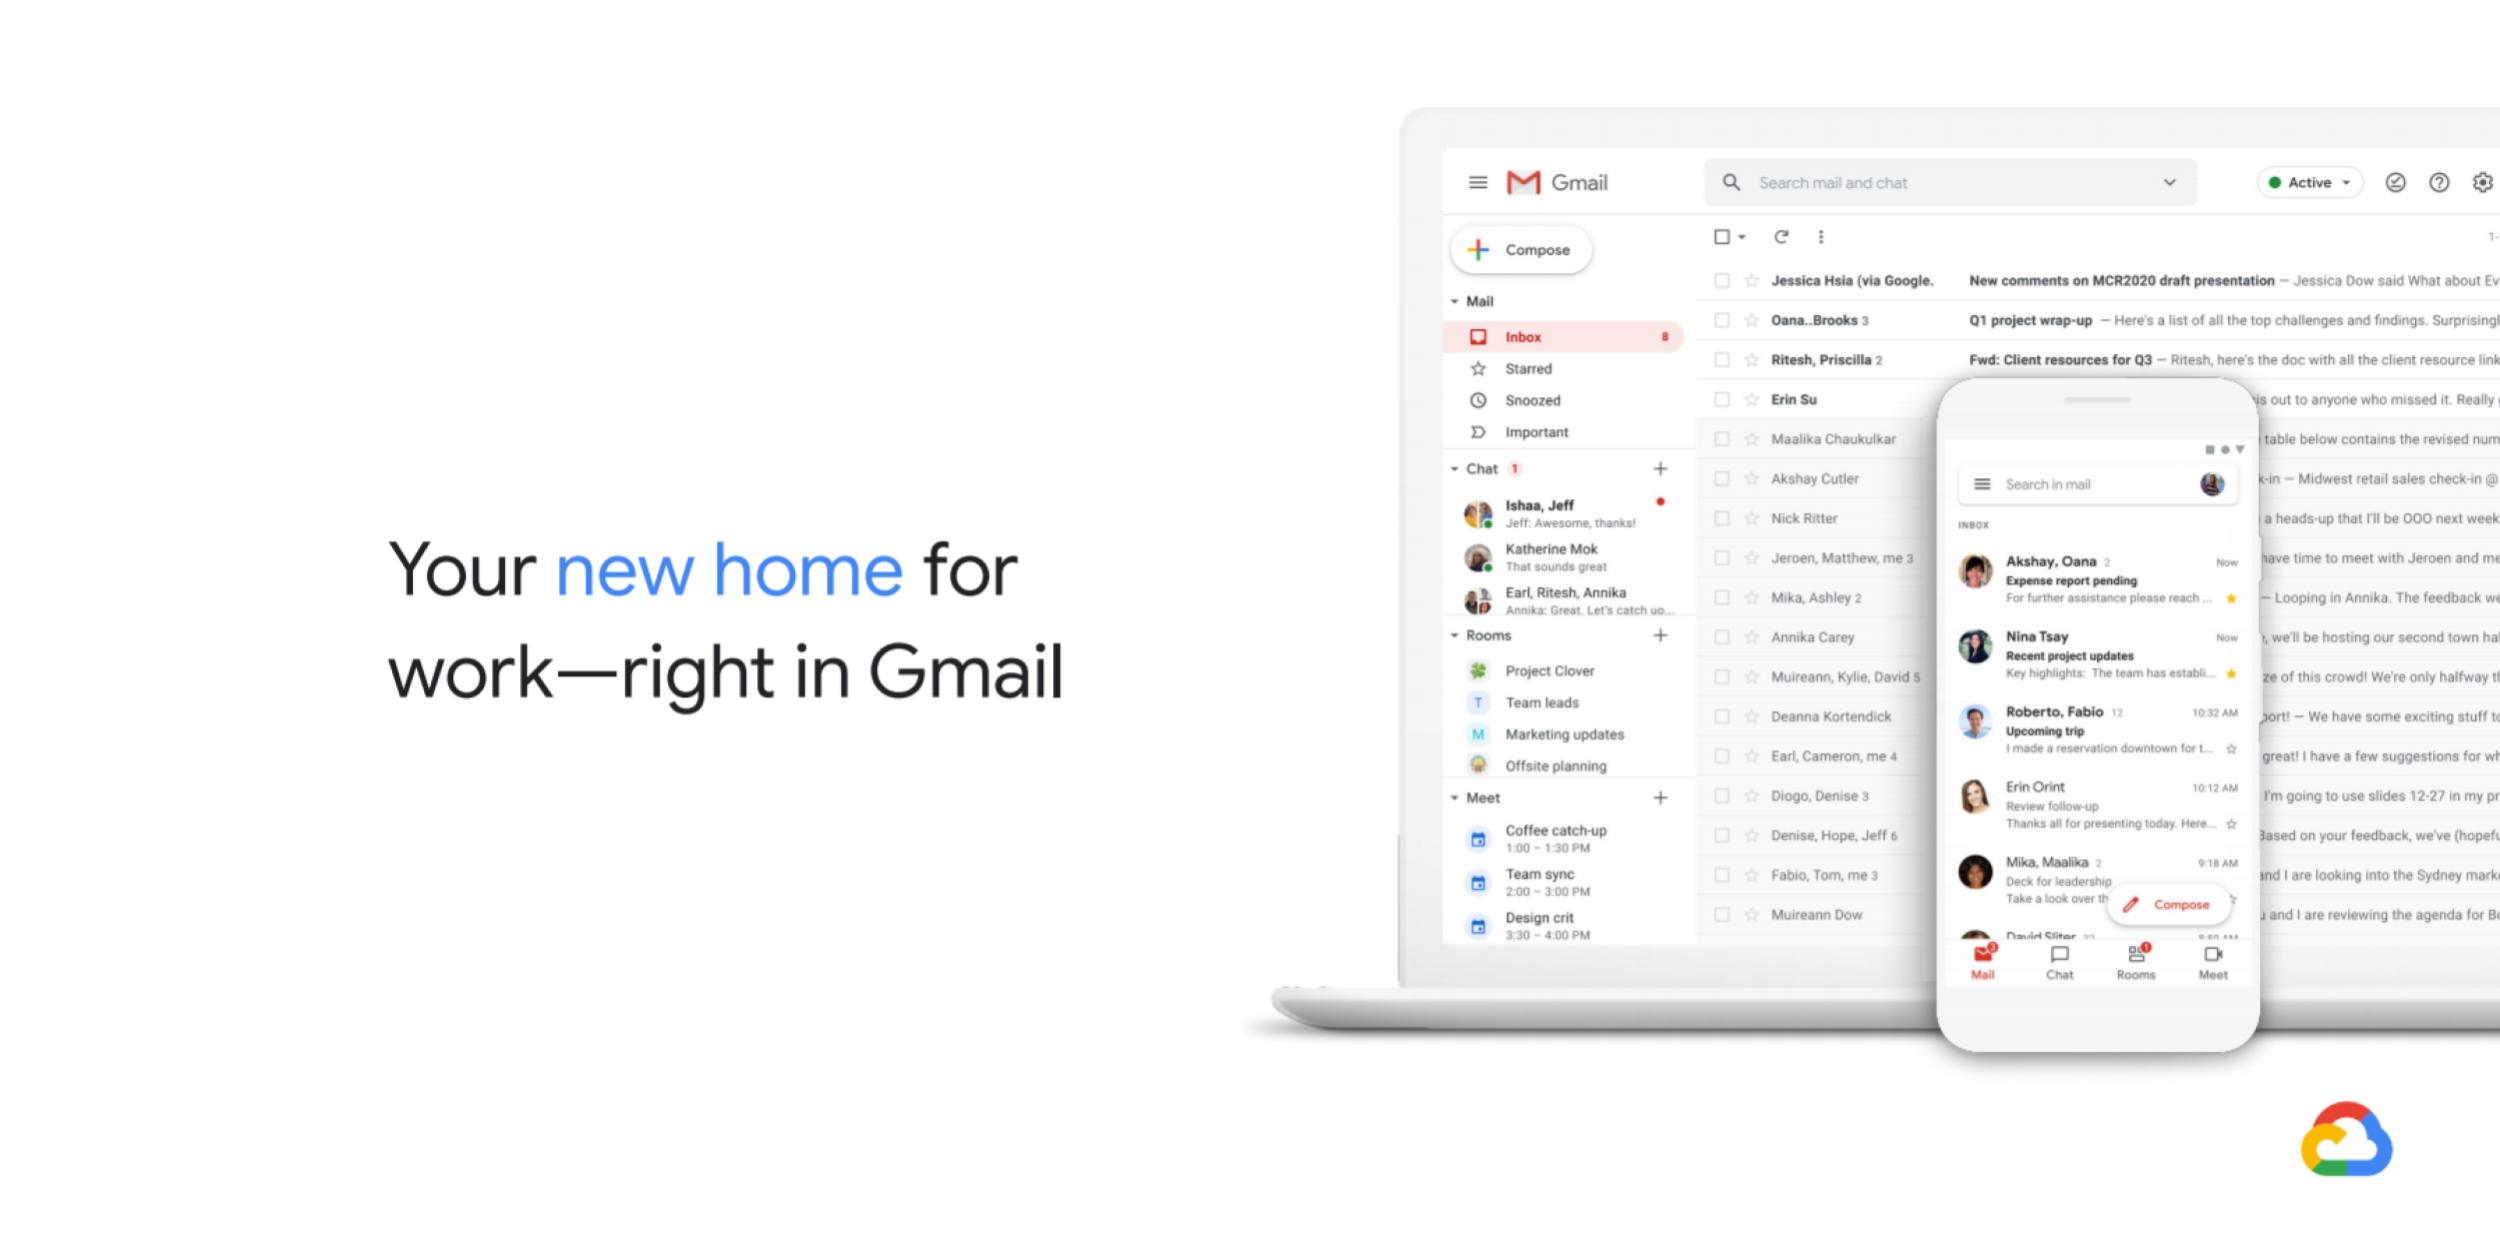 This will be the new design of Gmail for Android and iOS